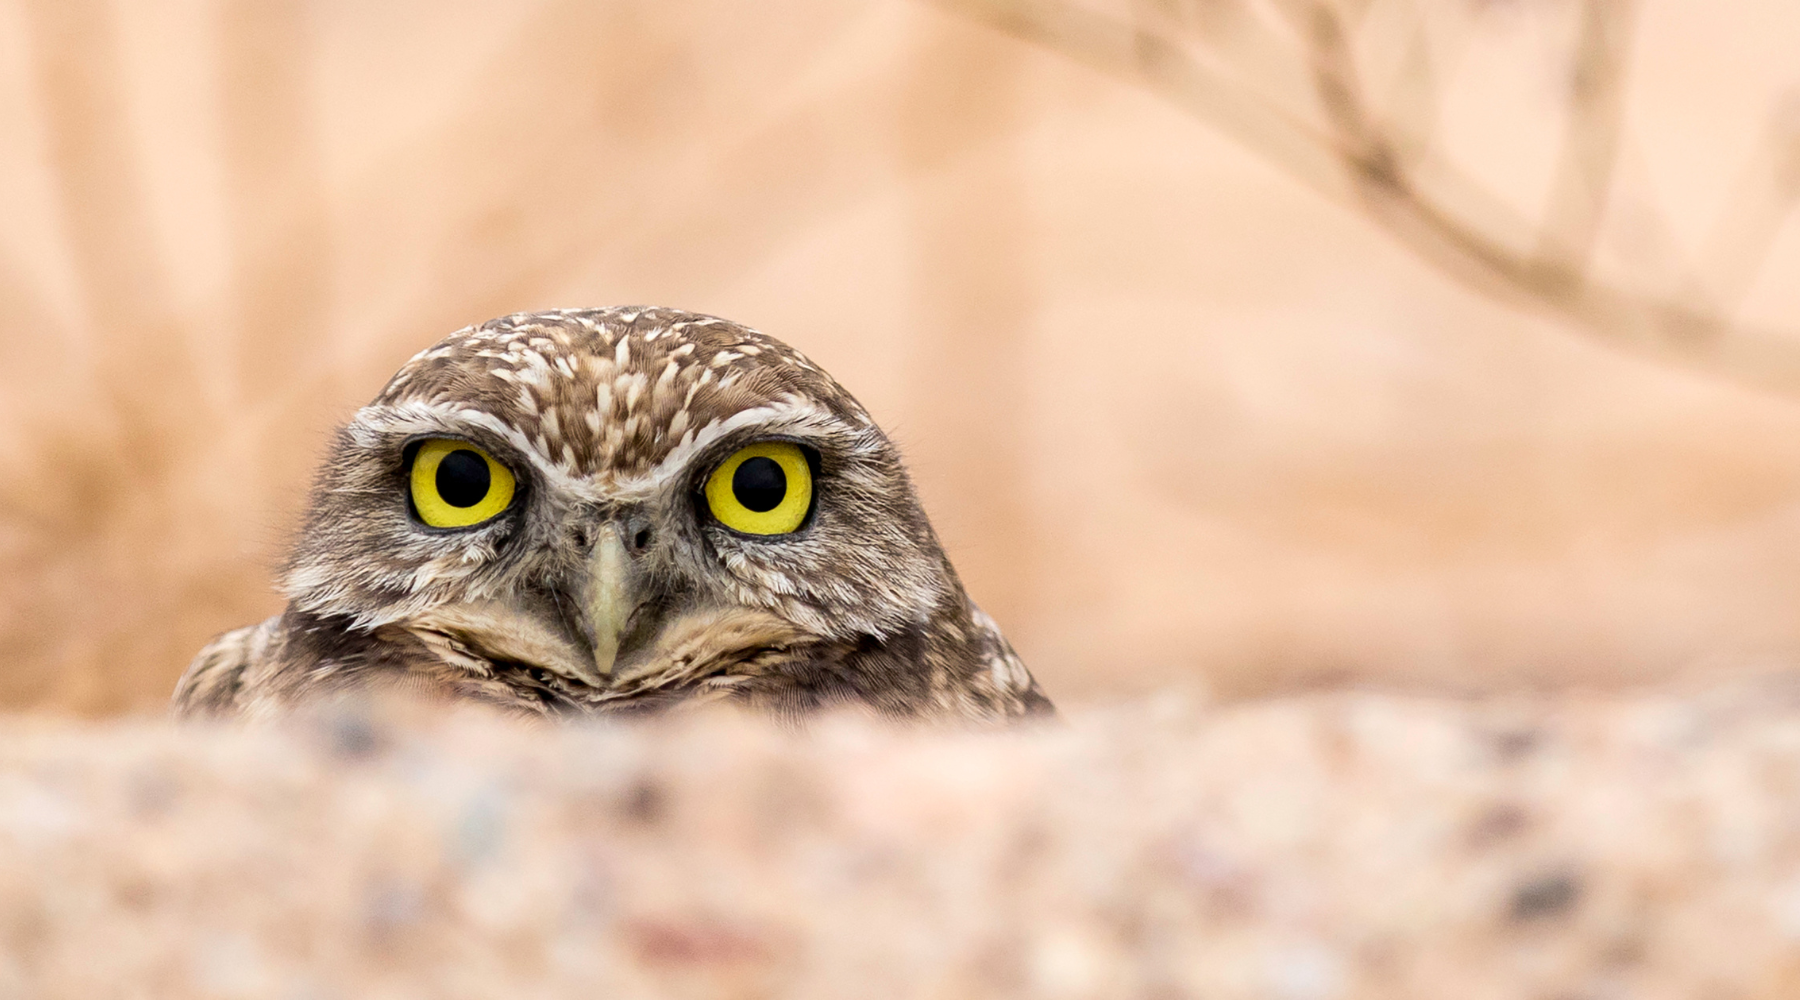 Photo Of A Burrowing Owl